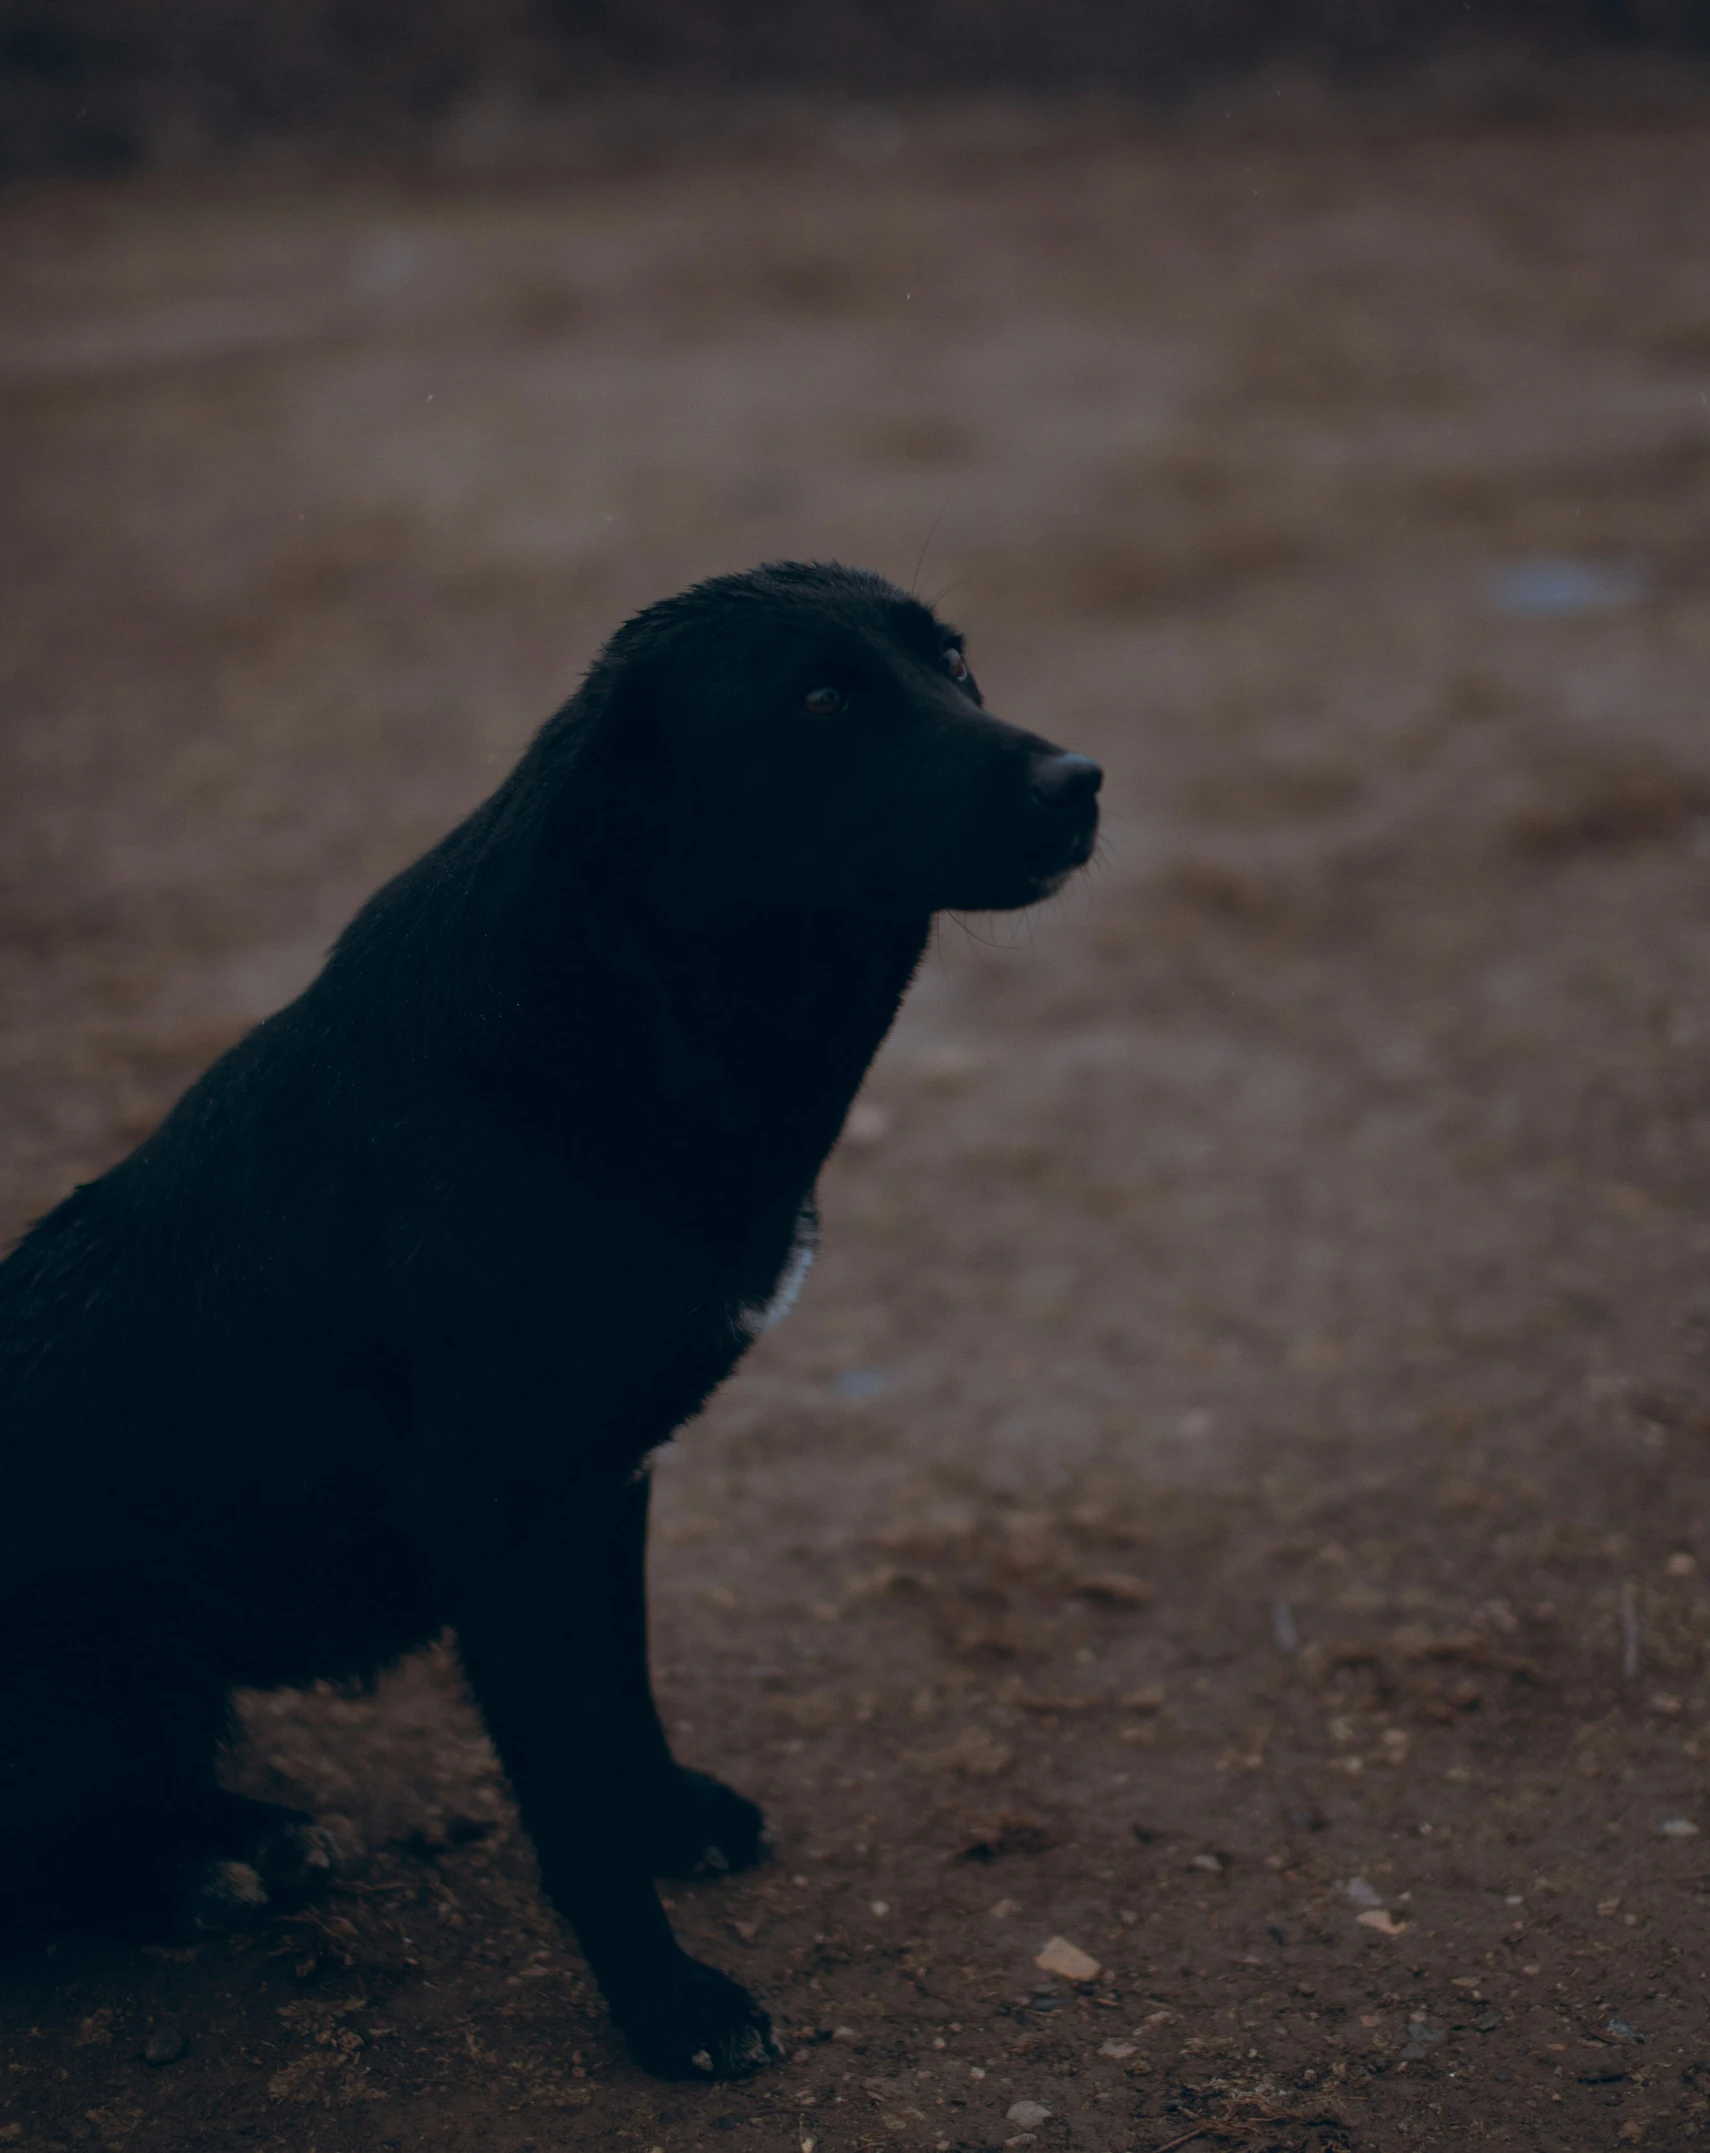 a black puppy is sitting in the dirt